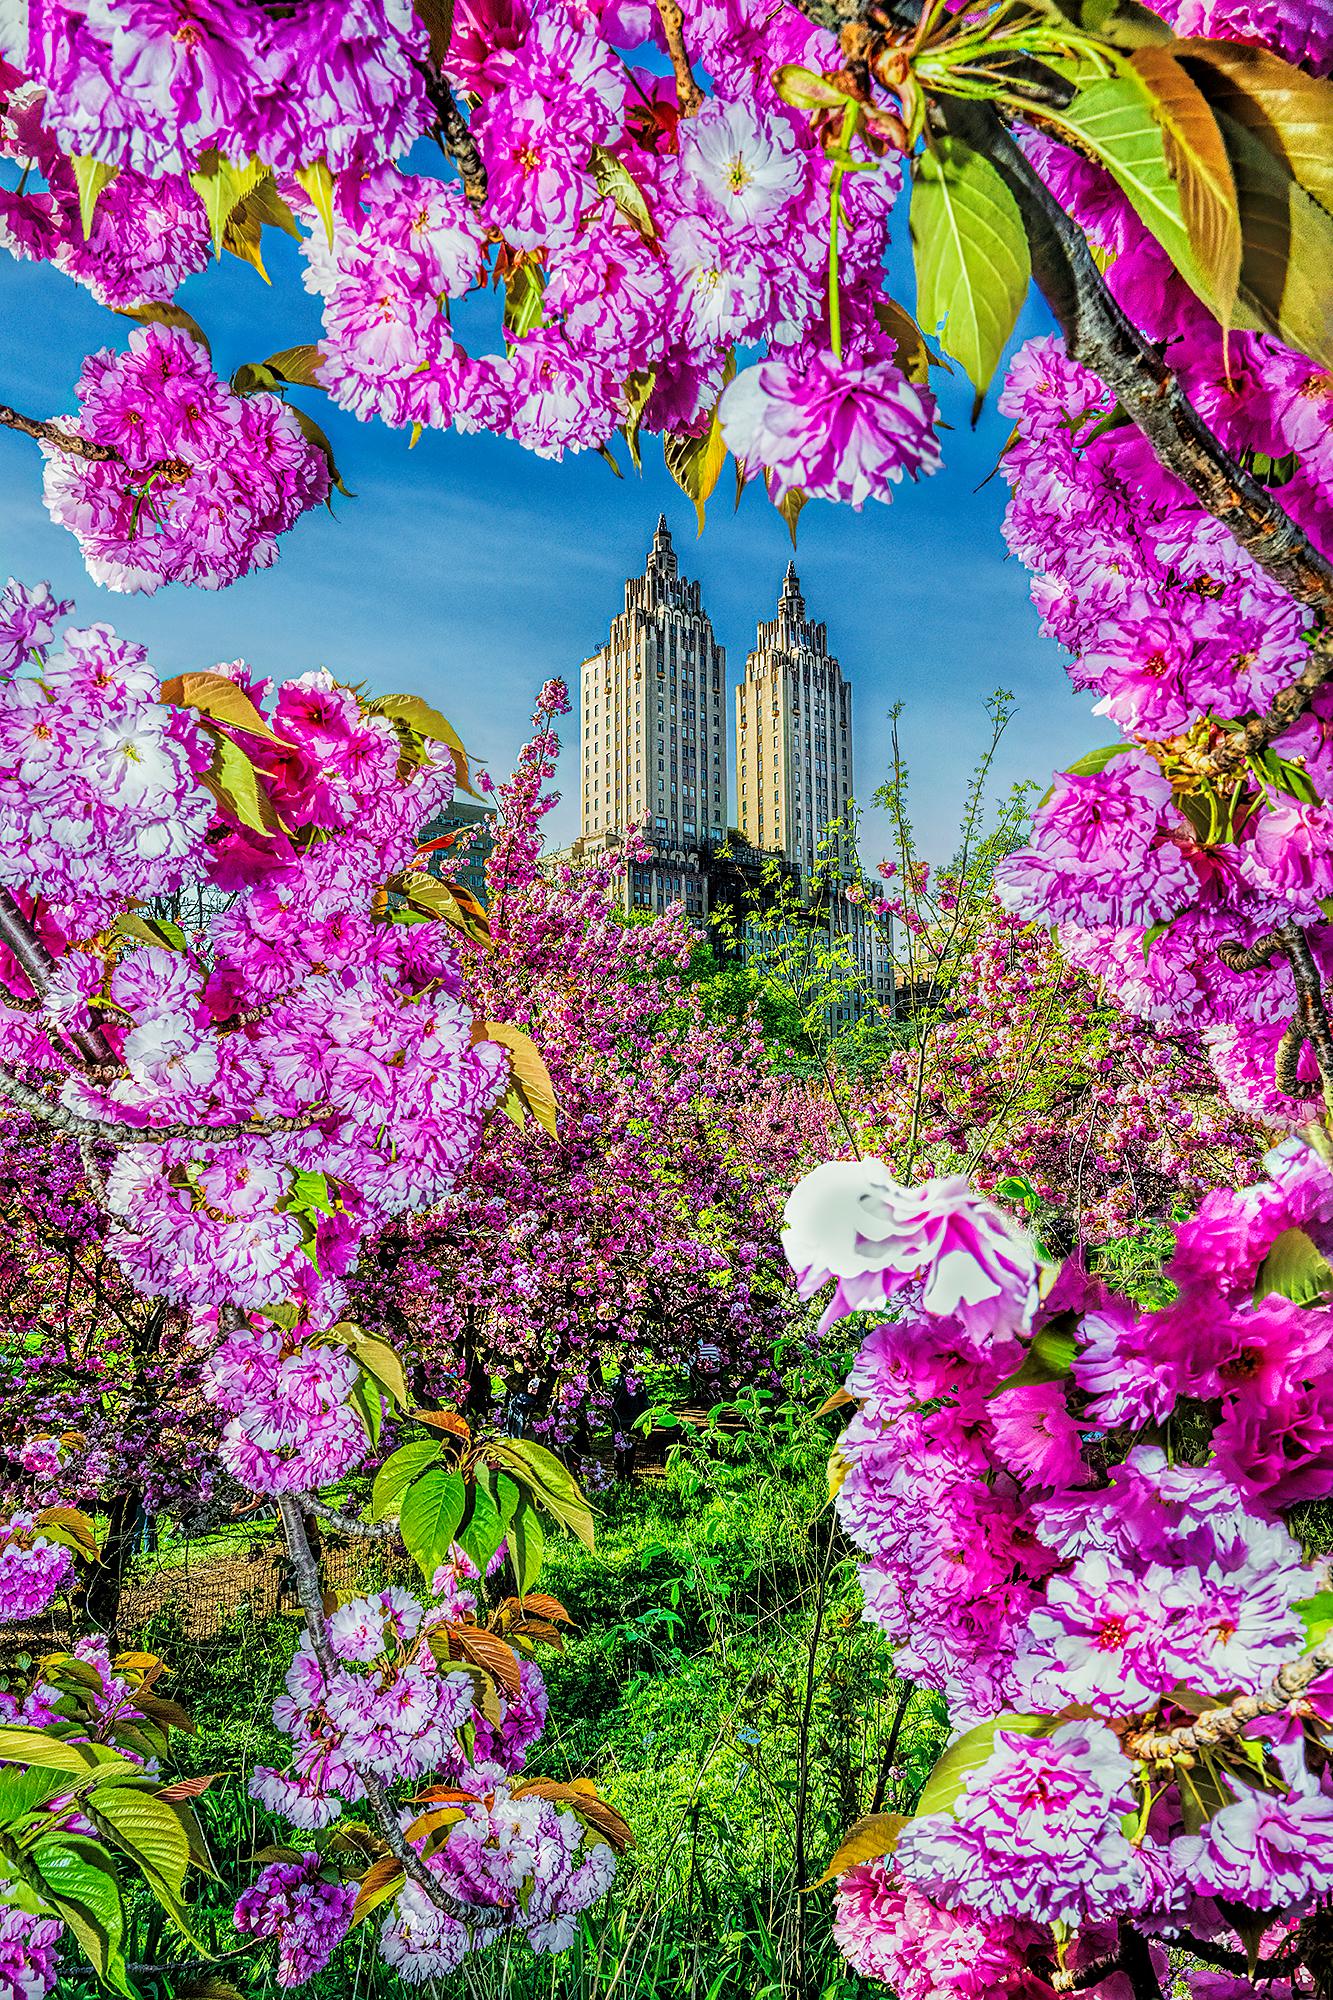 The San Remo Central Park West Framed by Cherry Blossoms Flowers